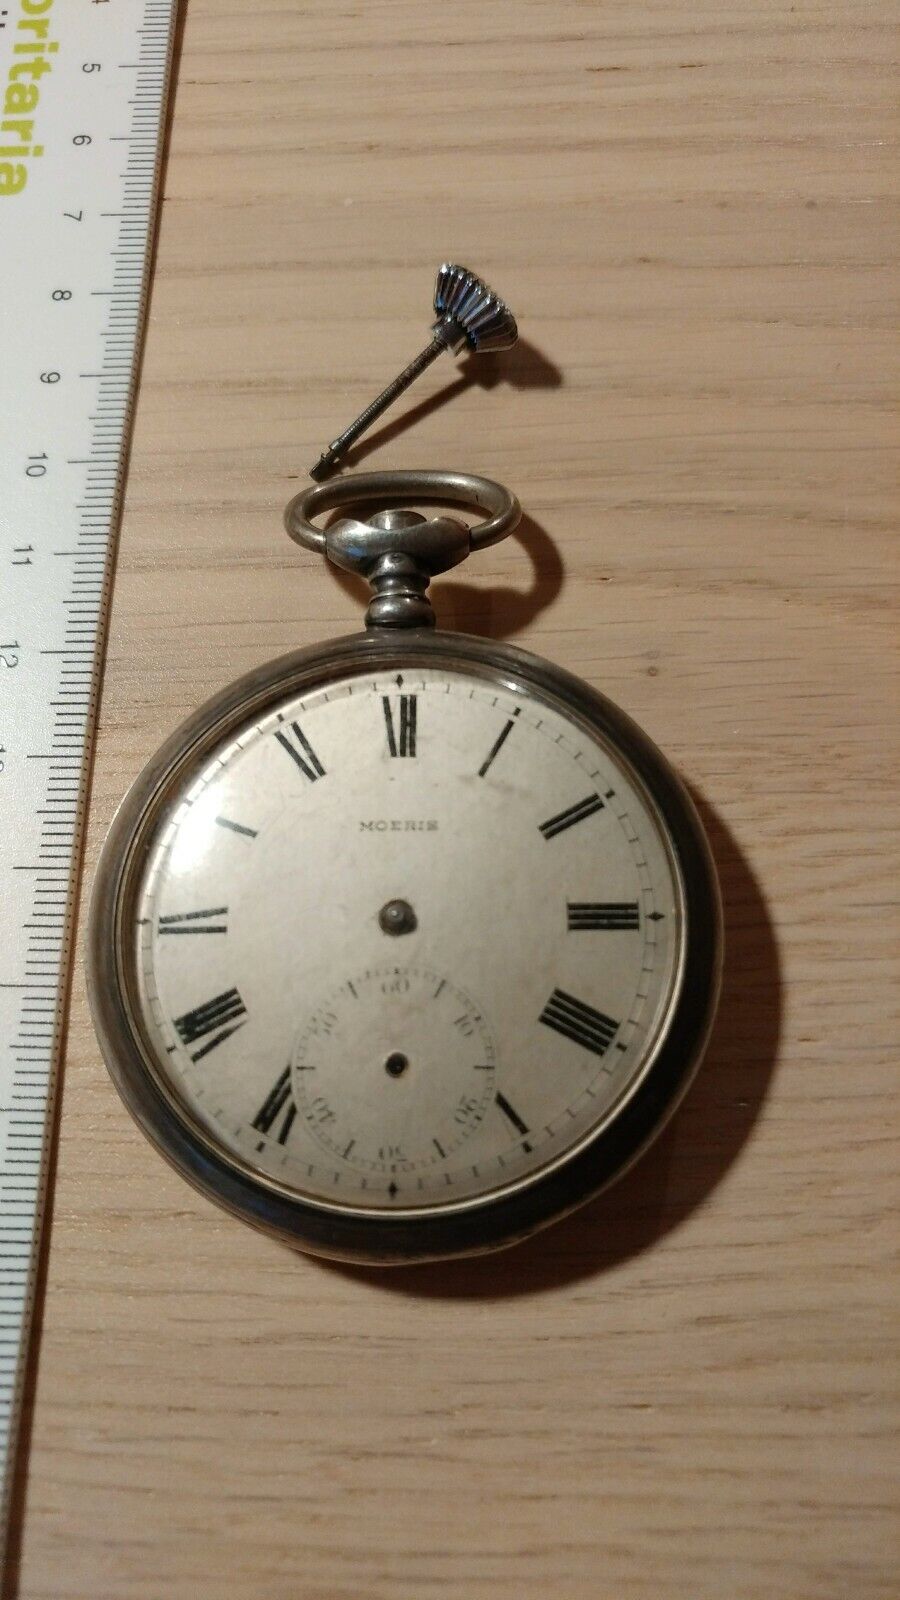 Pocket watch moeris Milan 1906, Working, incomplete and good